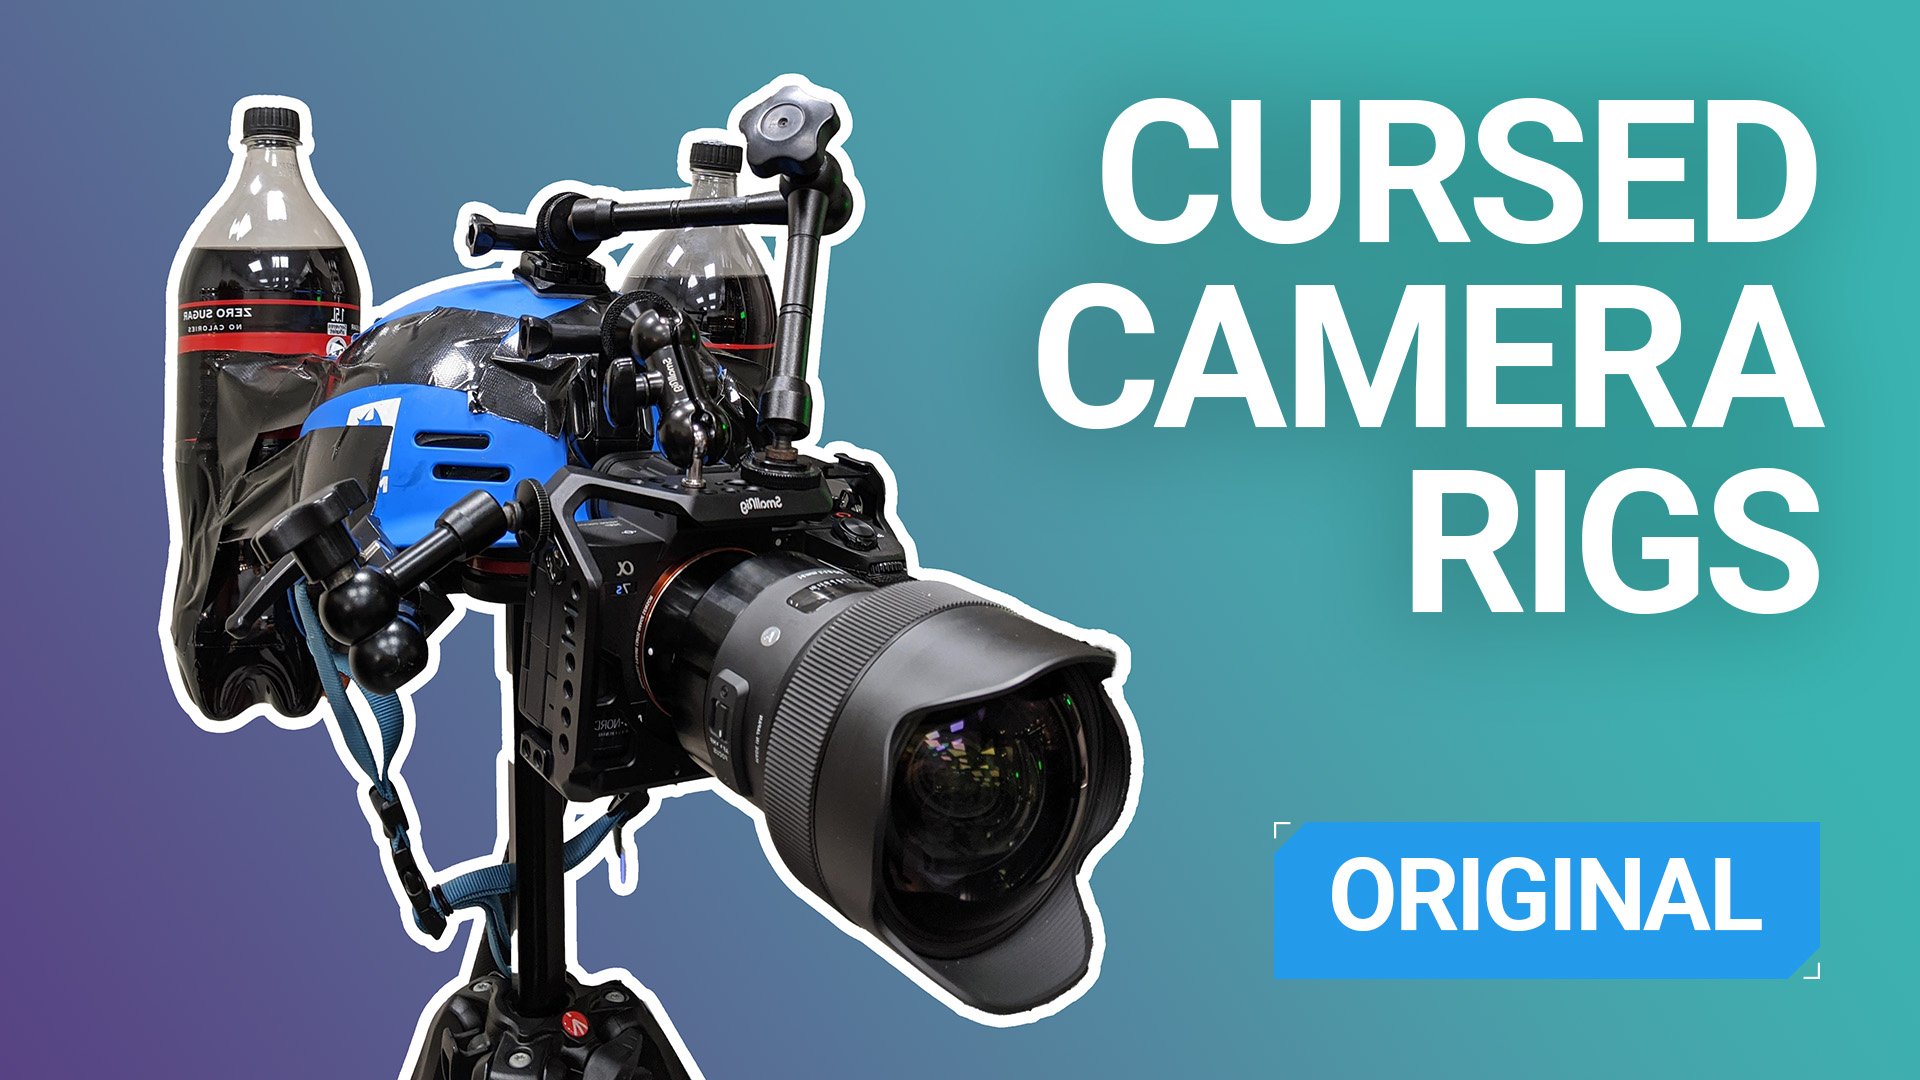 Cursed camera rigs - a new years special thumbnail